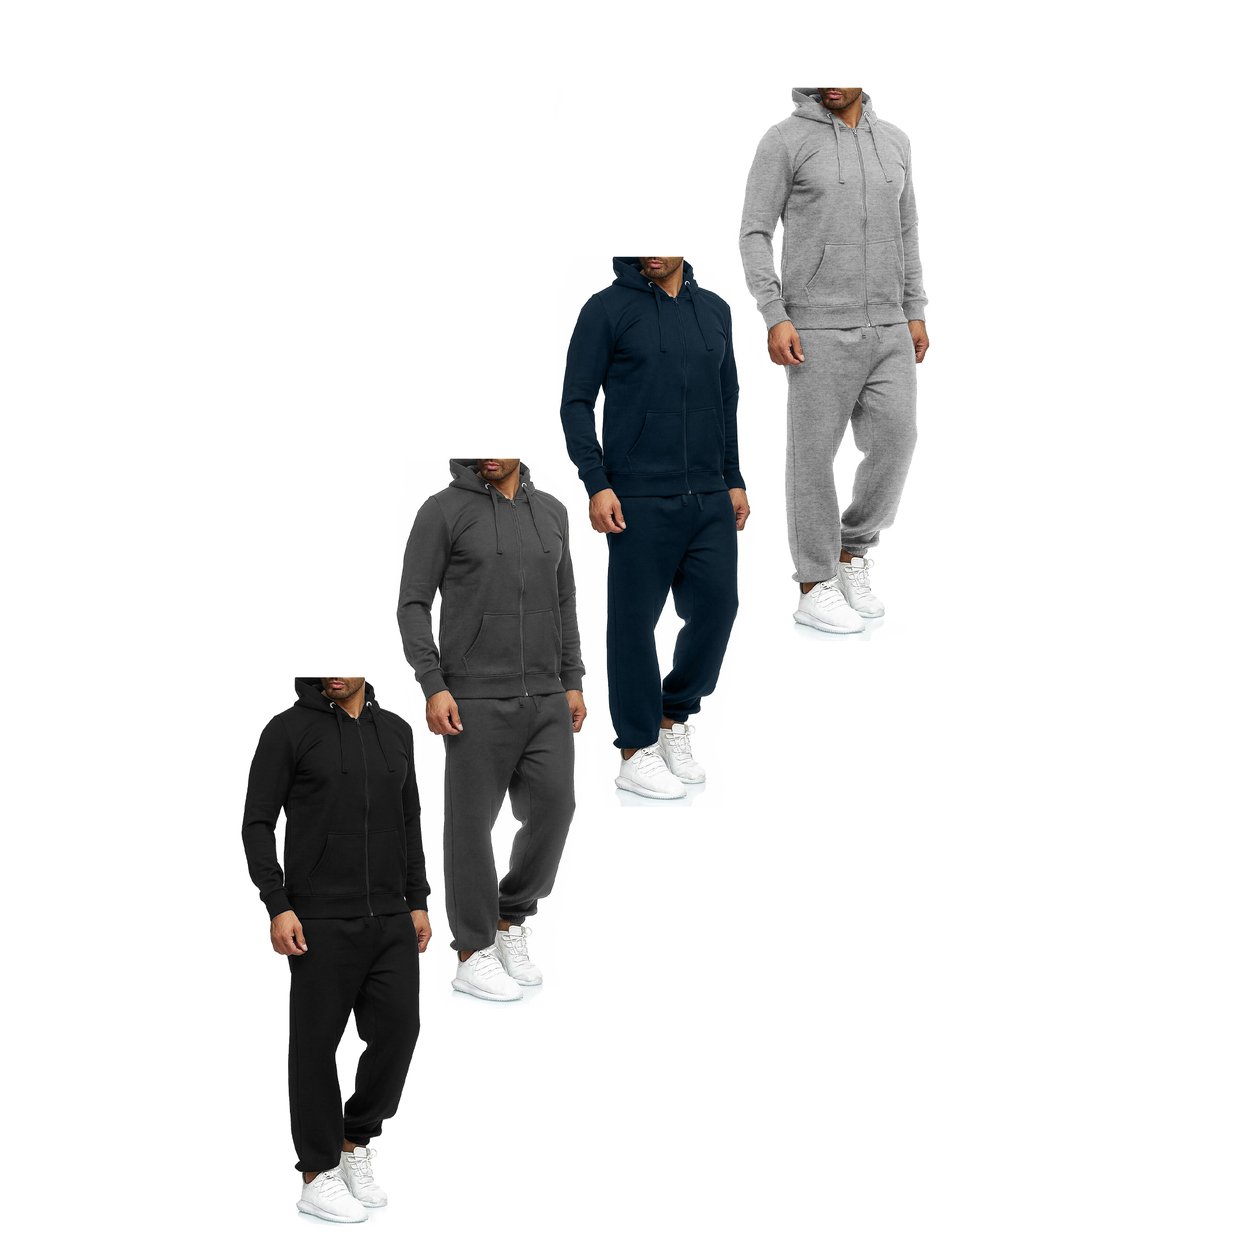 2-Pack: Men's Casual Big & Tall Athletic Active Winter Warm Fleece Lined Full Zip Tracksuit Jogger Set - Black, 3xl